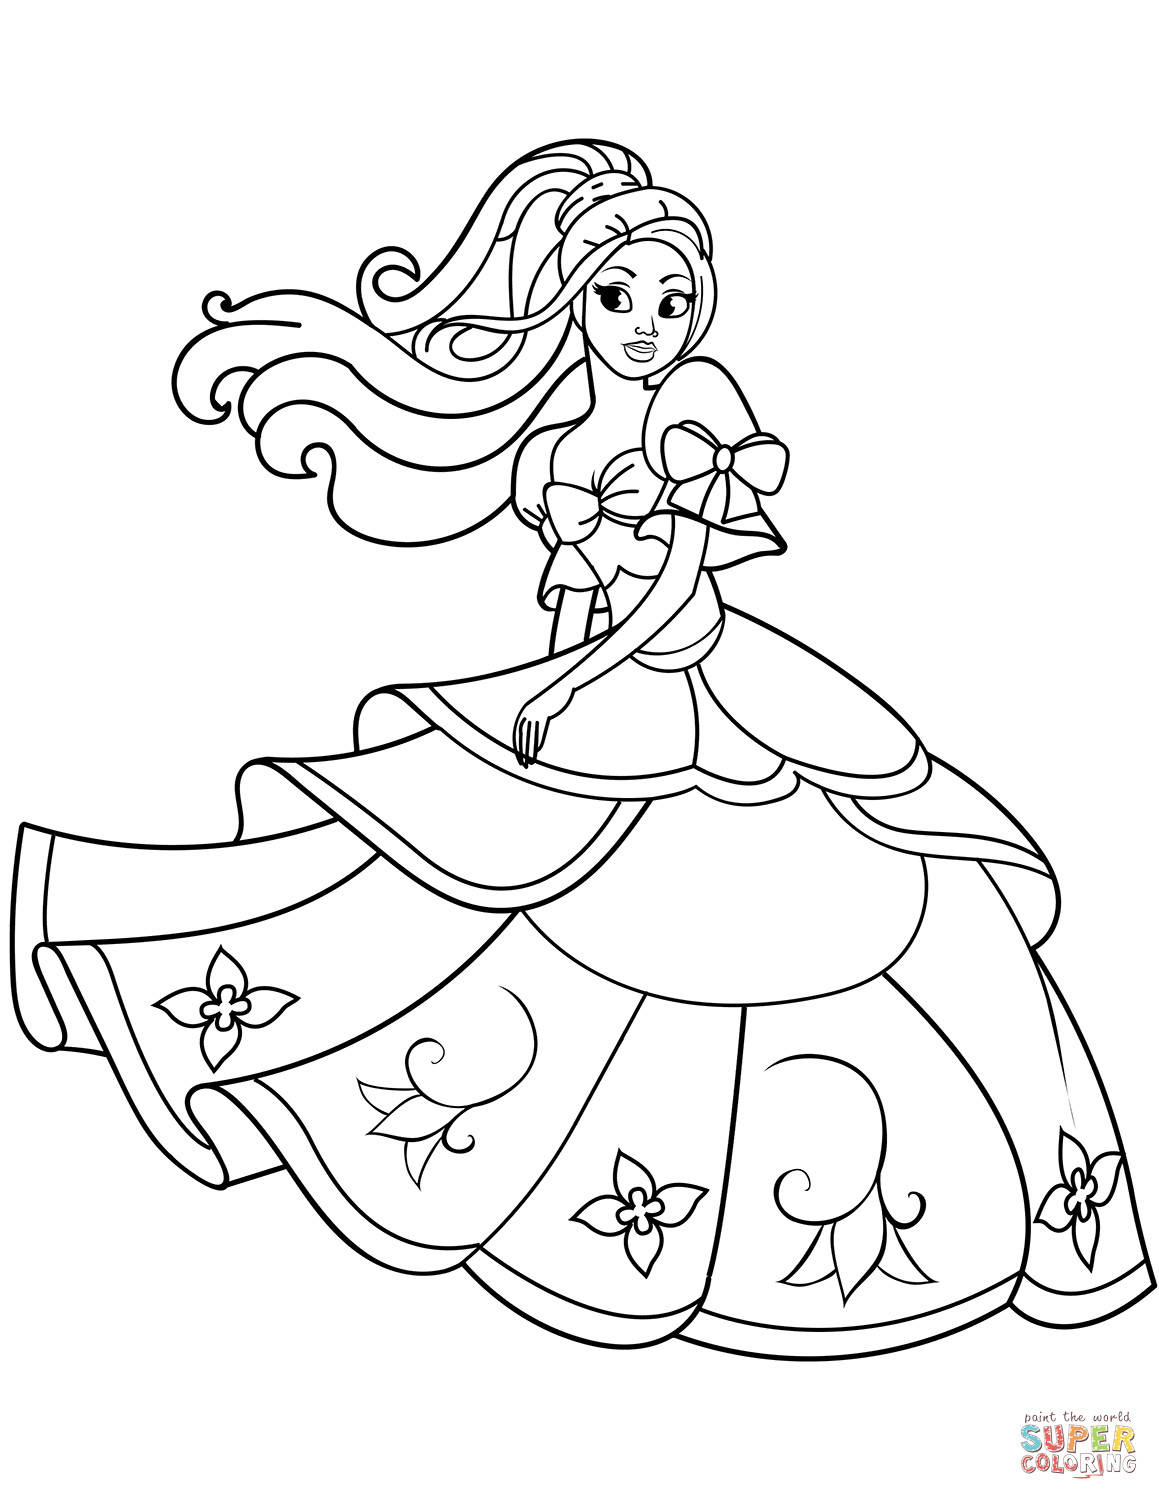 Princess Coloring Pages For Kids
 Dancing Princess coloring page